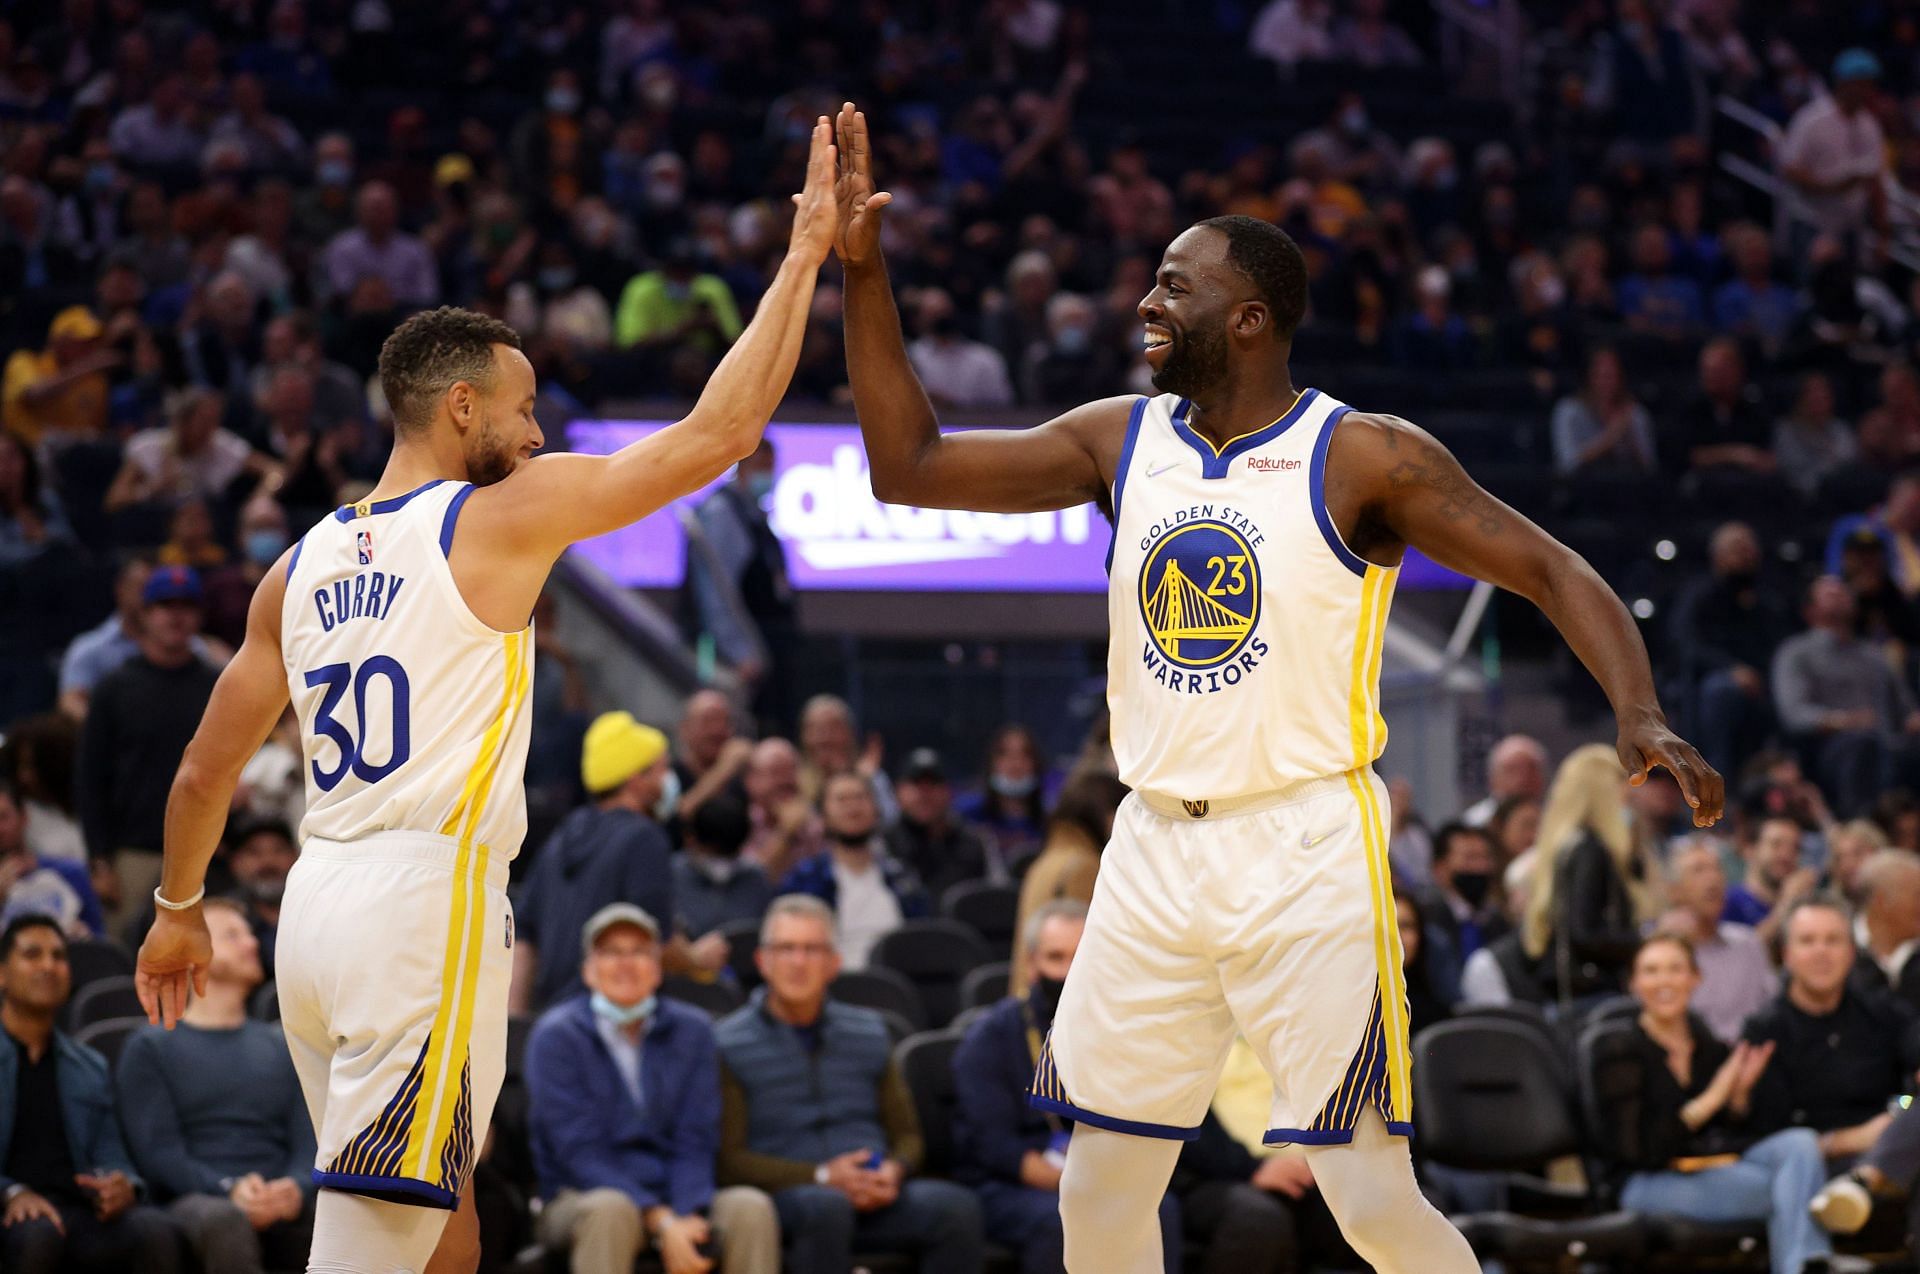 Steph Curry, left, and Draymond Green of the Golden State Warriors.